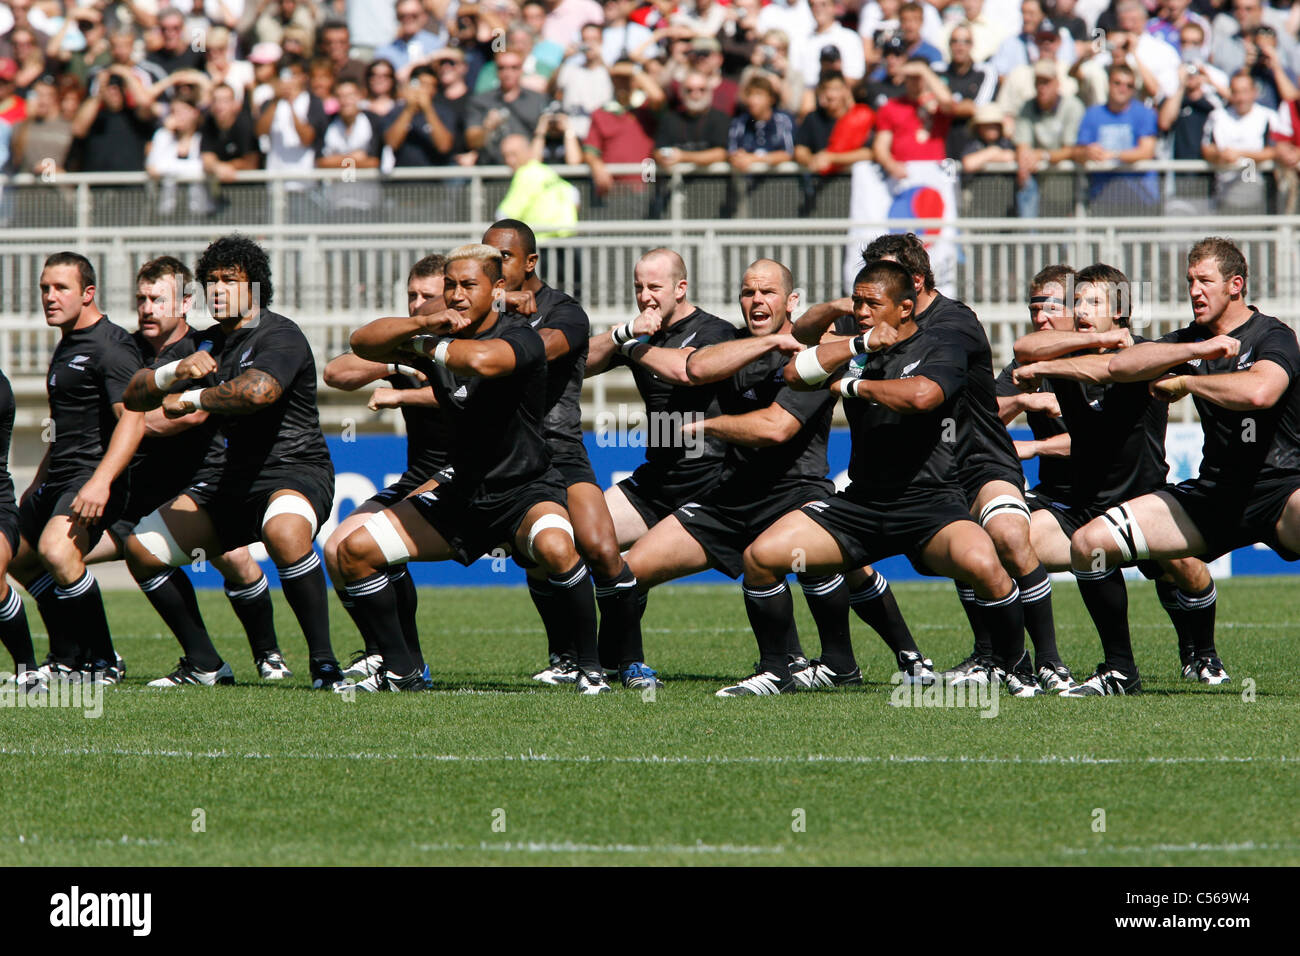 All Blacks rugby team from New Zealand performing the ritual Haka before the match Stock Photo